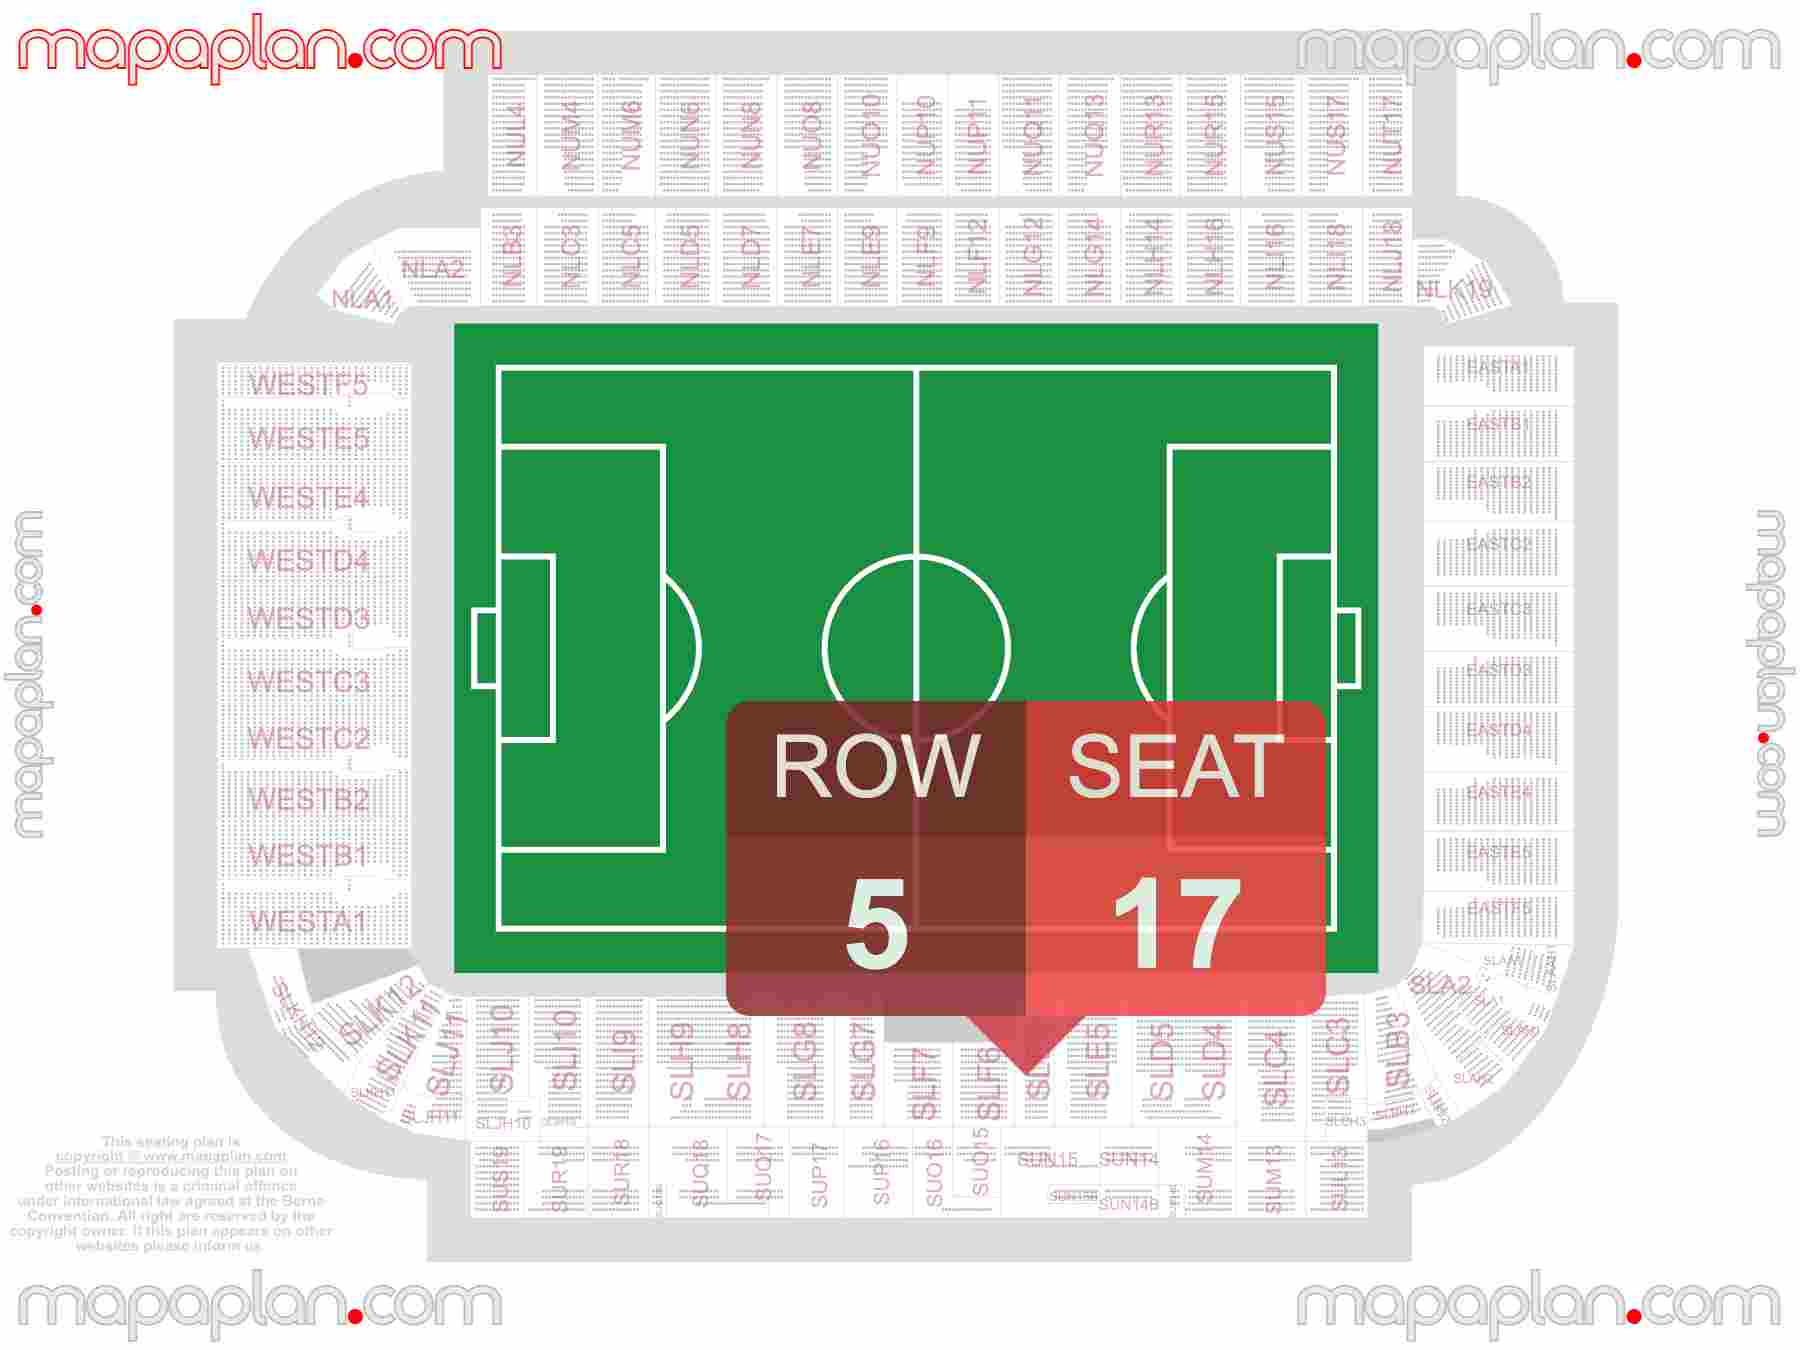 Belfast Windsor Park National Football Stadium seating plan Football detailed seat numbers and row numbering plan with interactive map map layout